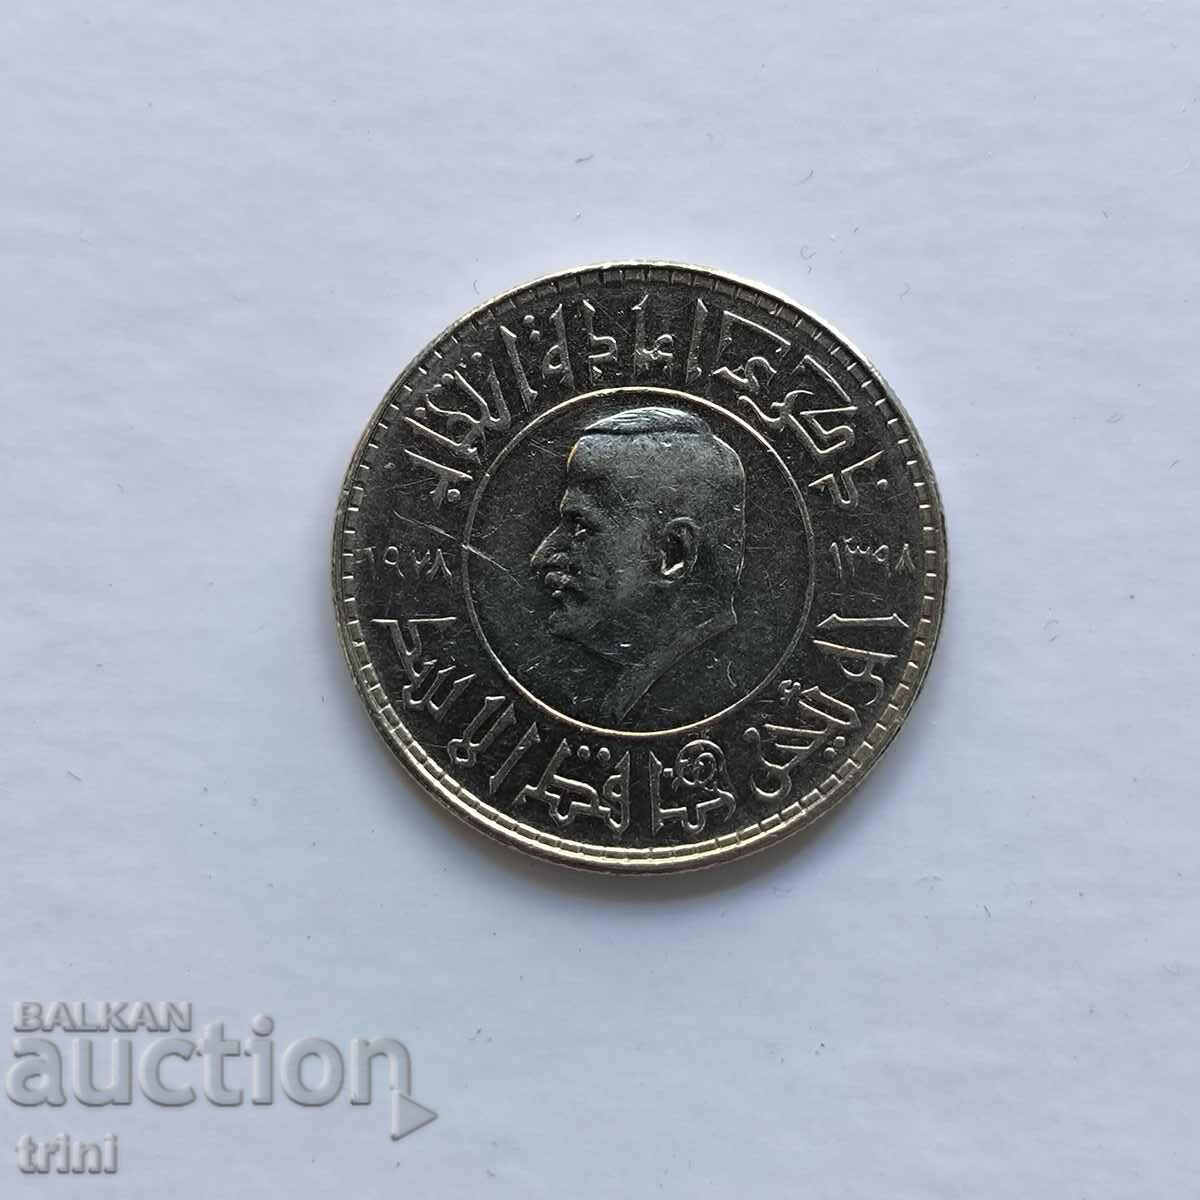 Syria 1 lira 1978 Re-election of the President